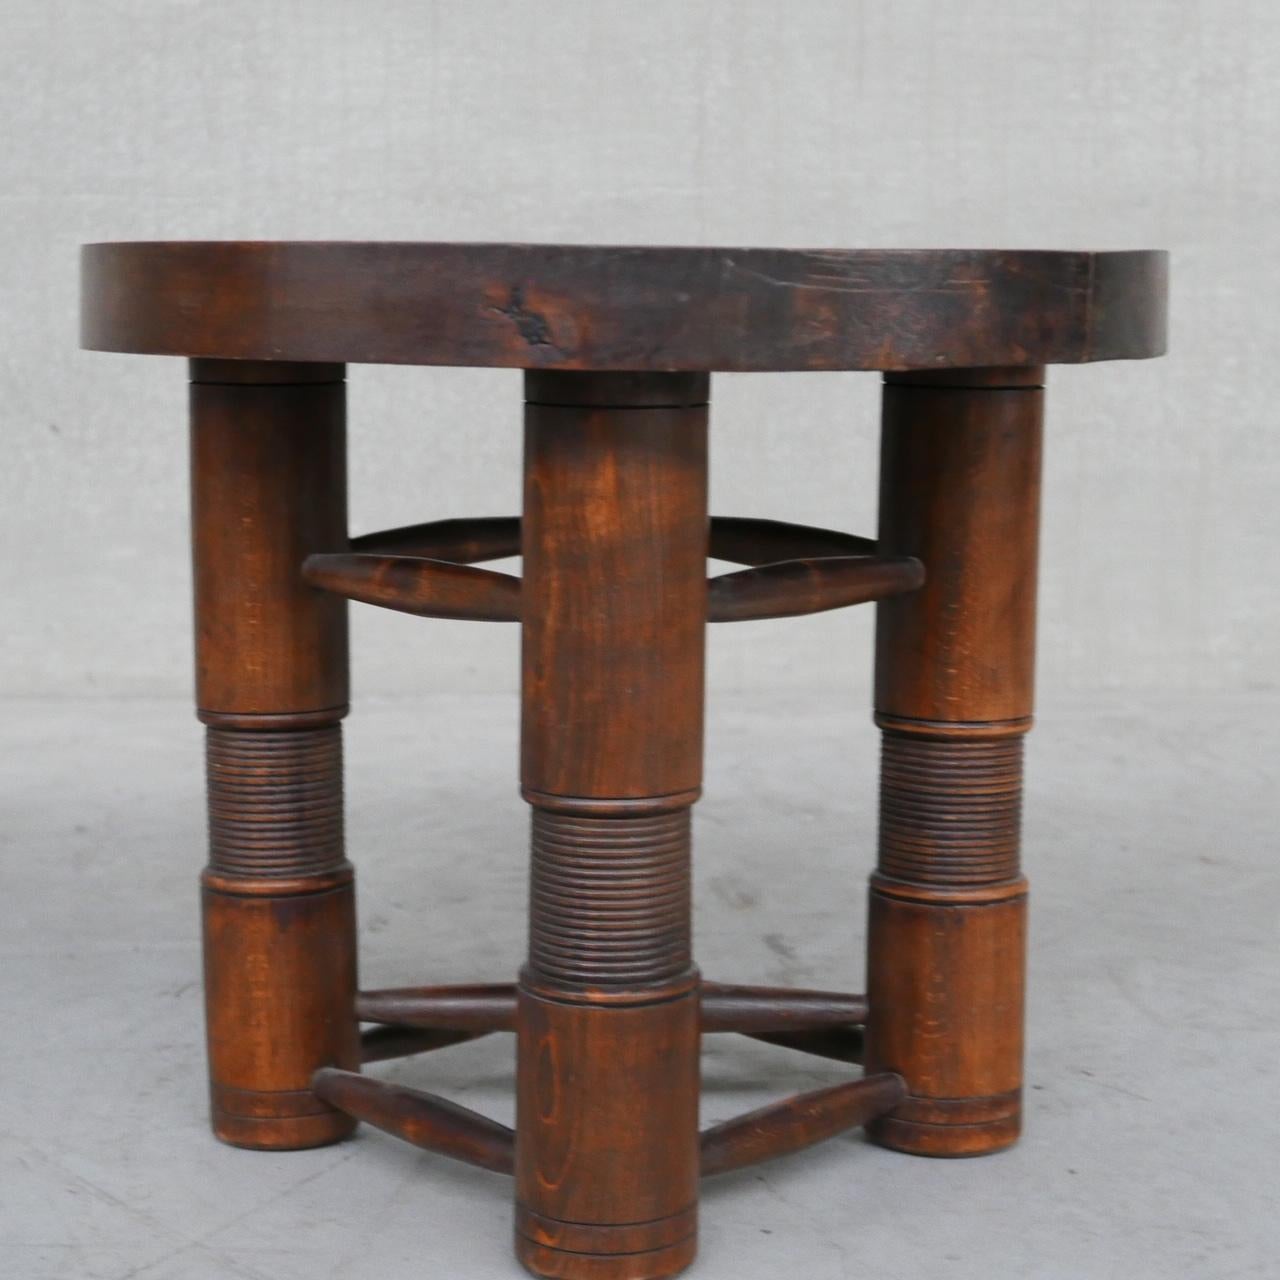 A scarce deco side table by Charles Dudouyt. 

France, c1940s. 

Solid oak with copper hand beaten detailing. 

Rare model. 

Location: Belgium Gallery. 

Dimensions: 58 Diameter x 51 H in cm. 

Delivery: POA

We can ship around the